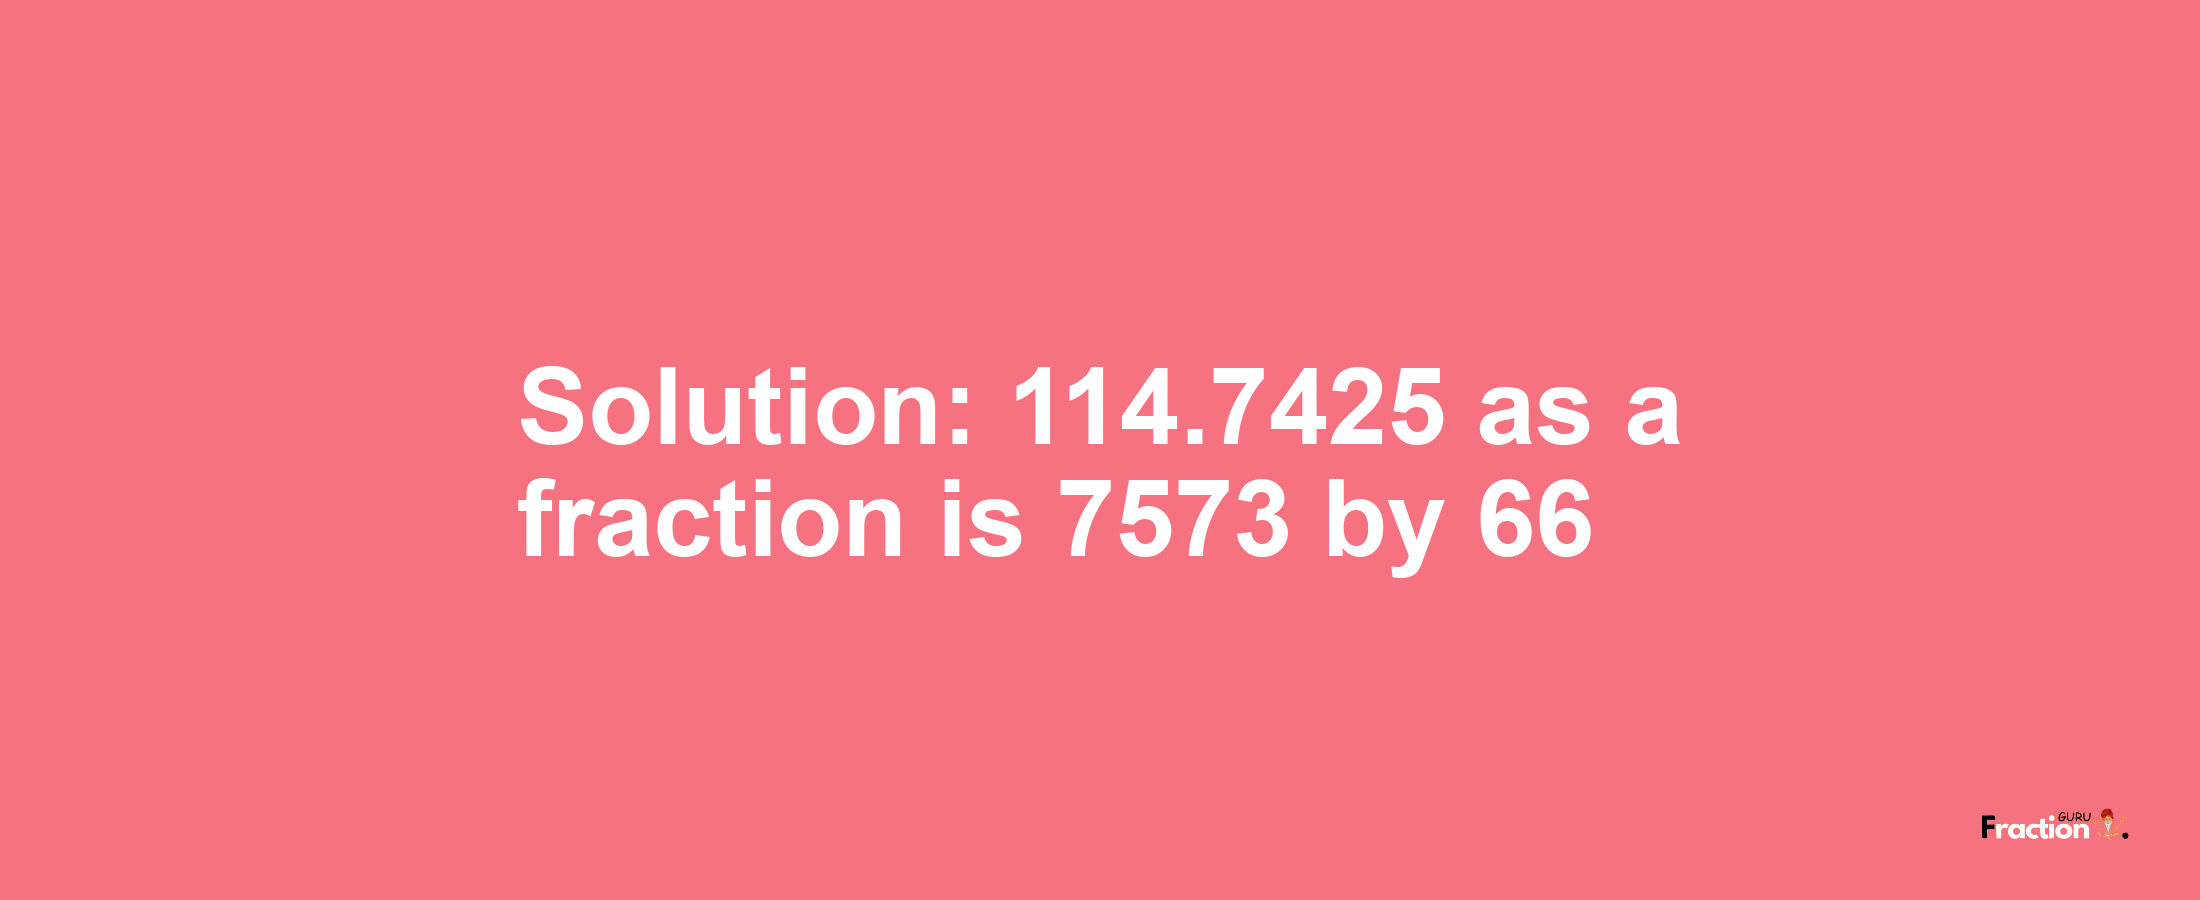 Solution:114.7425 as a fraction is 7573/66